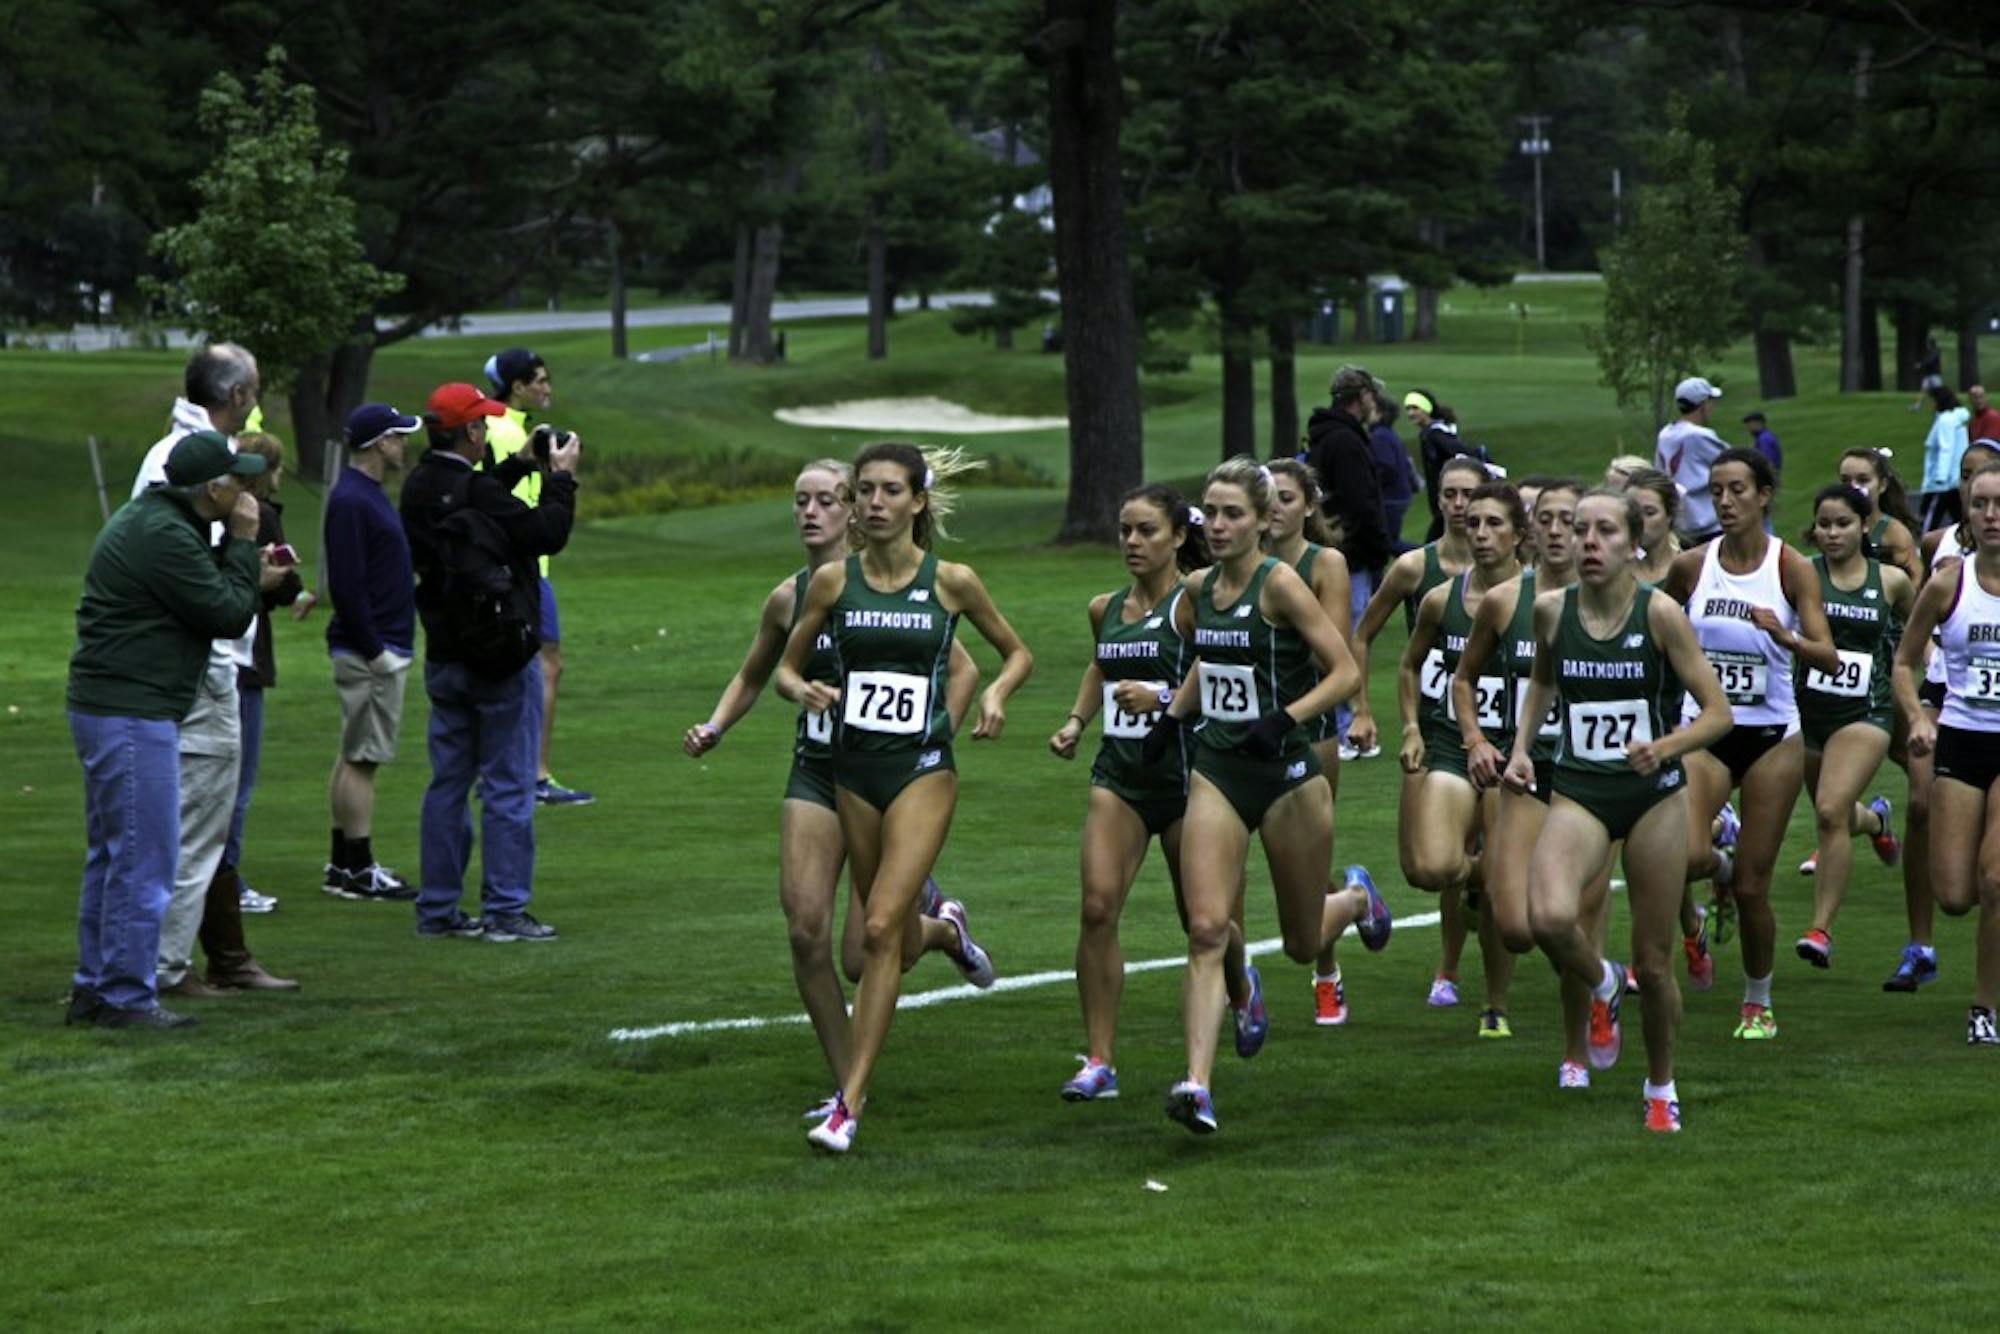 Dana Giordano ’16 leads a pack of Big Green runners at the Dartmouth Invitational earlier this fall. Dartmouth took first place.